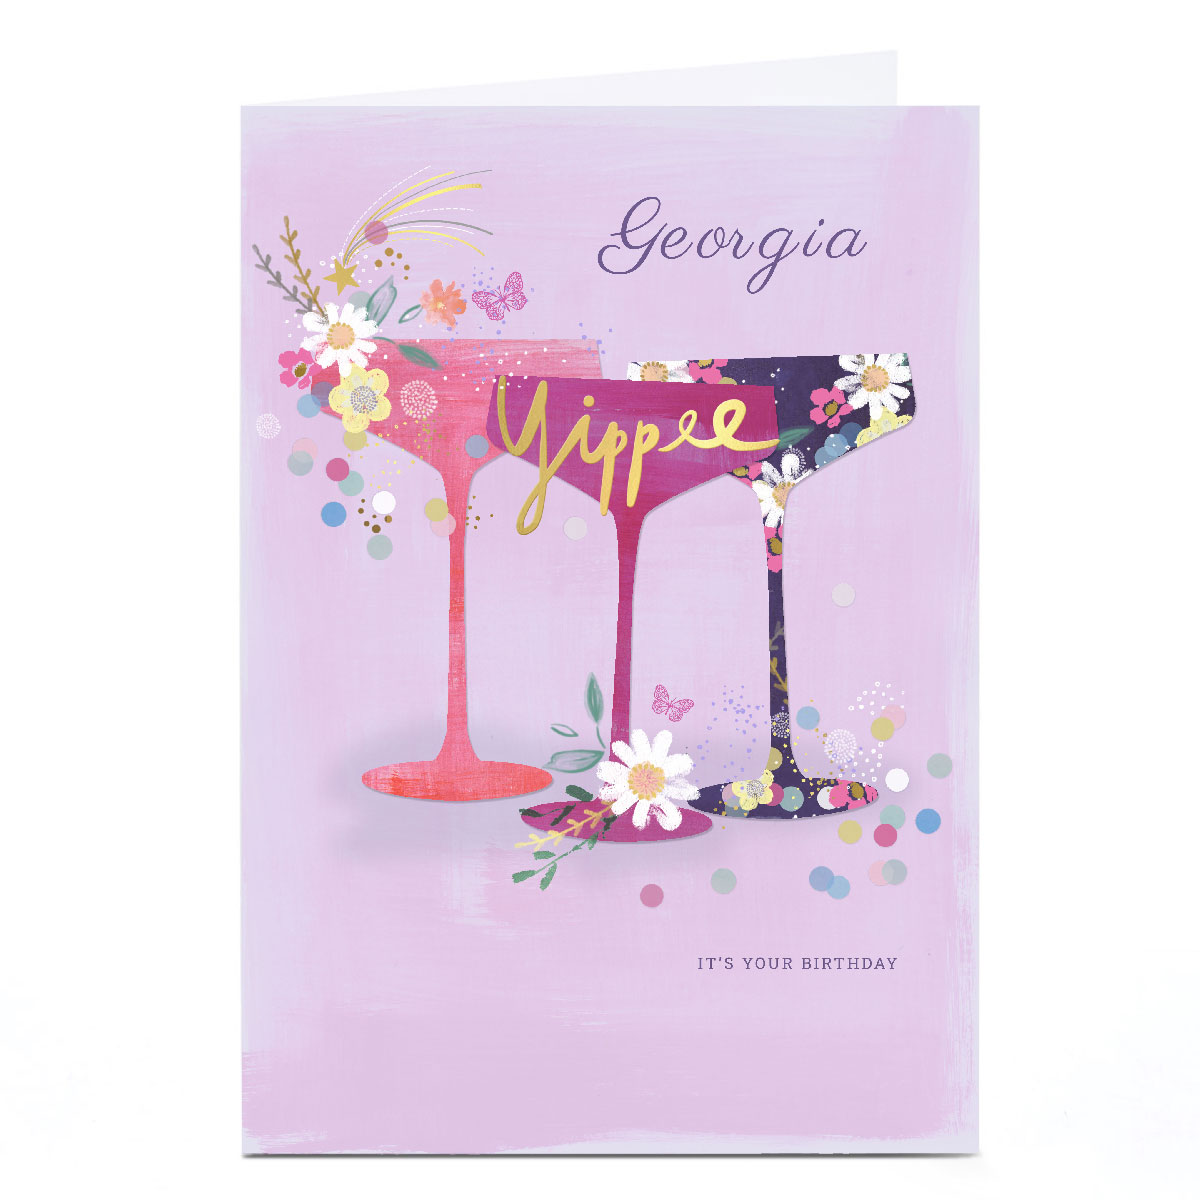 Personalised Kerry Spurling Birthday Card - Yippee Cocktails